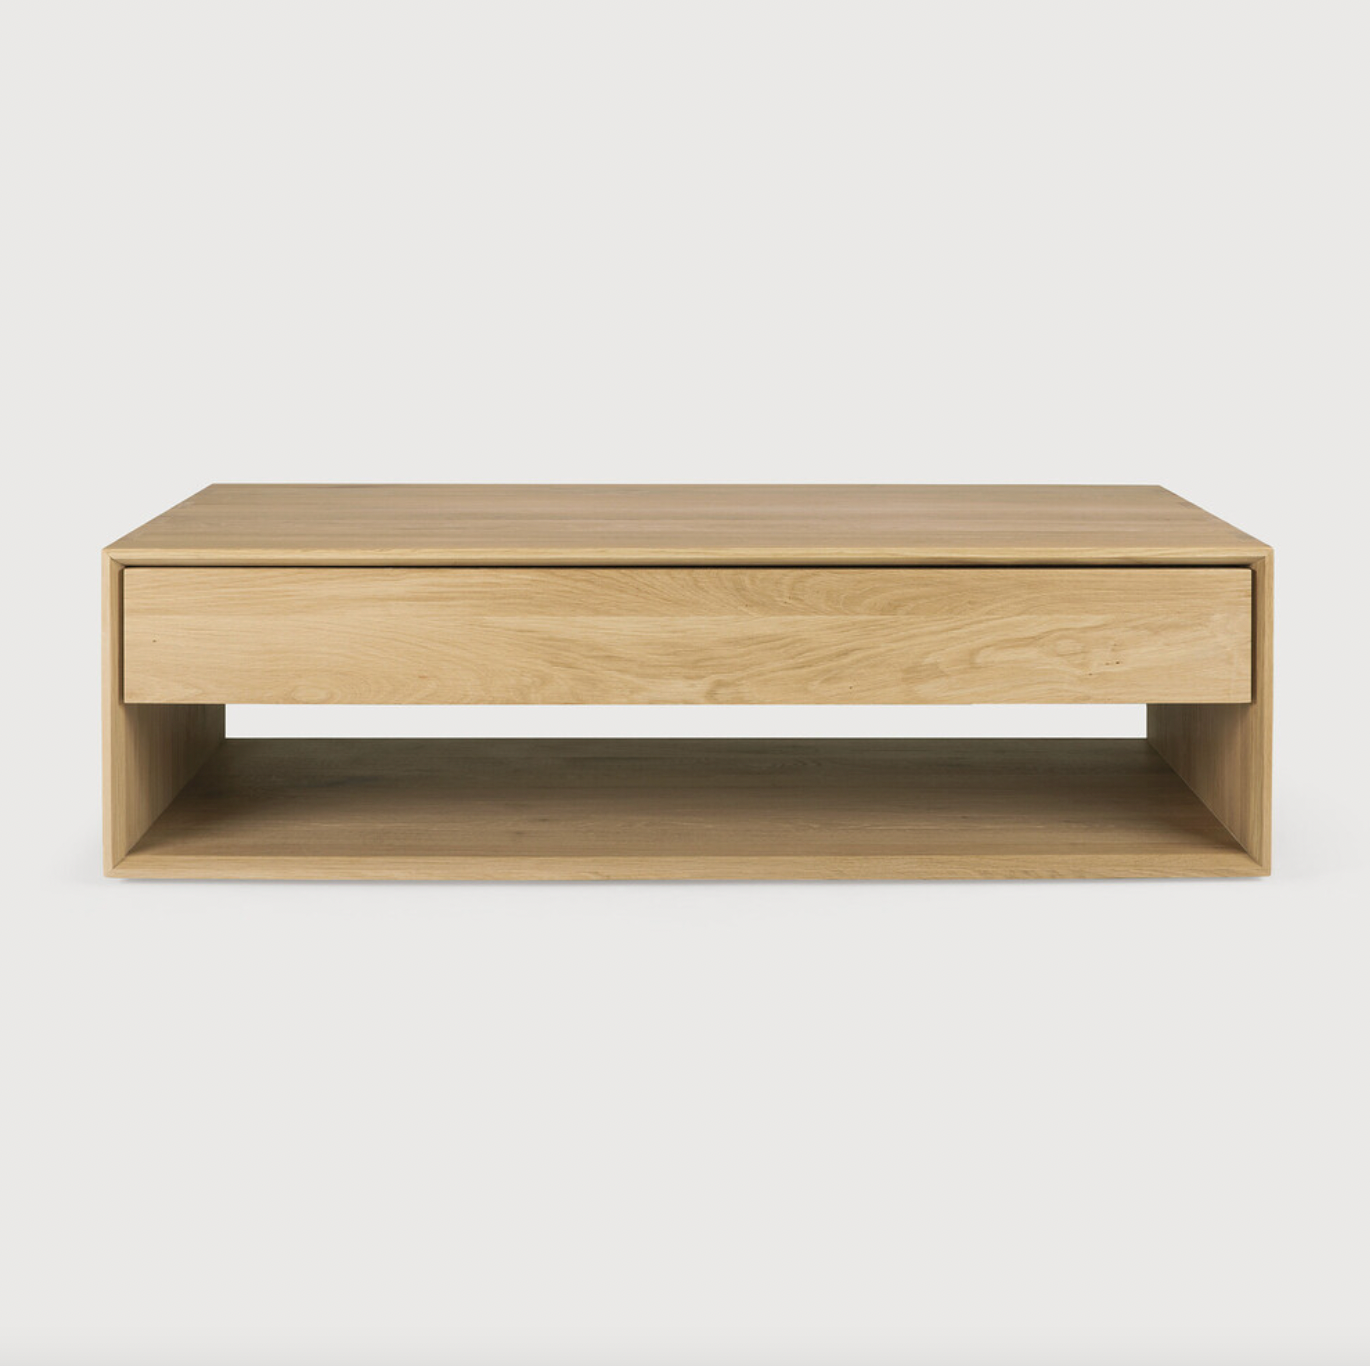 Featuring both a bottom shelf and a drawer, this Oak Nordic Coffee Table brings a functional and beautiful organic element to any living room or lounge area.   Dimensions: 47.5"w x 28"d x 14"h  Weight: 112 lbs  Material: Oak, 100% solid wood Finish: Oiled